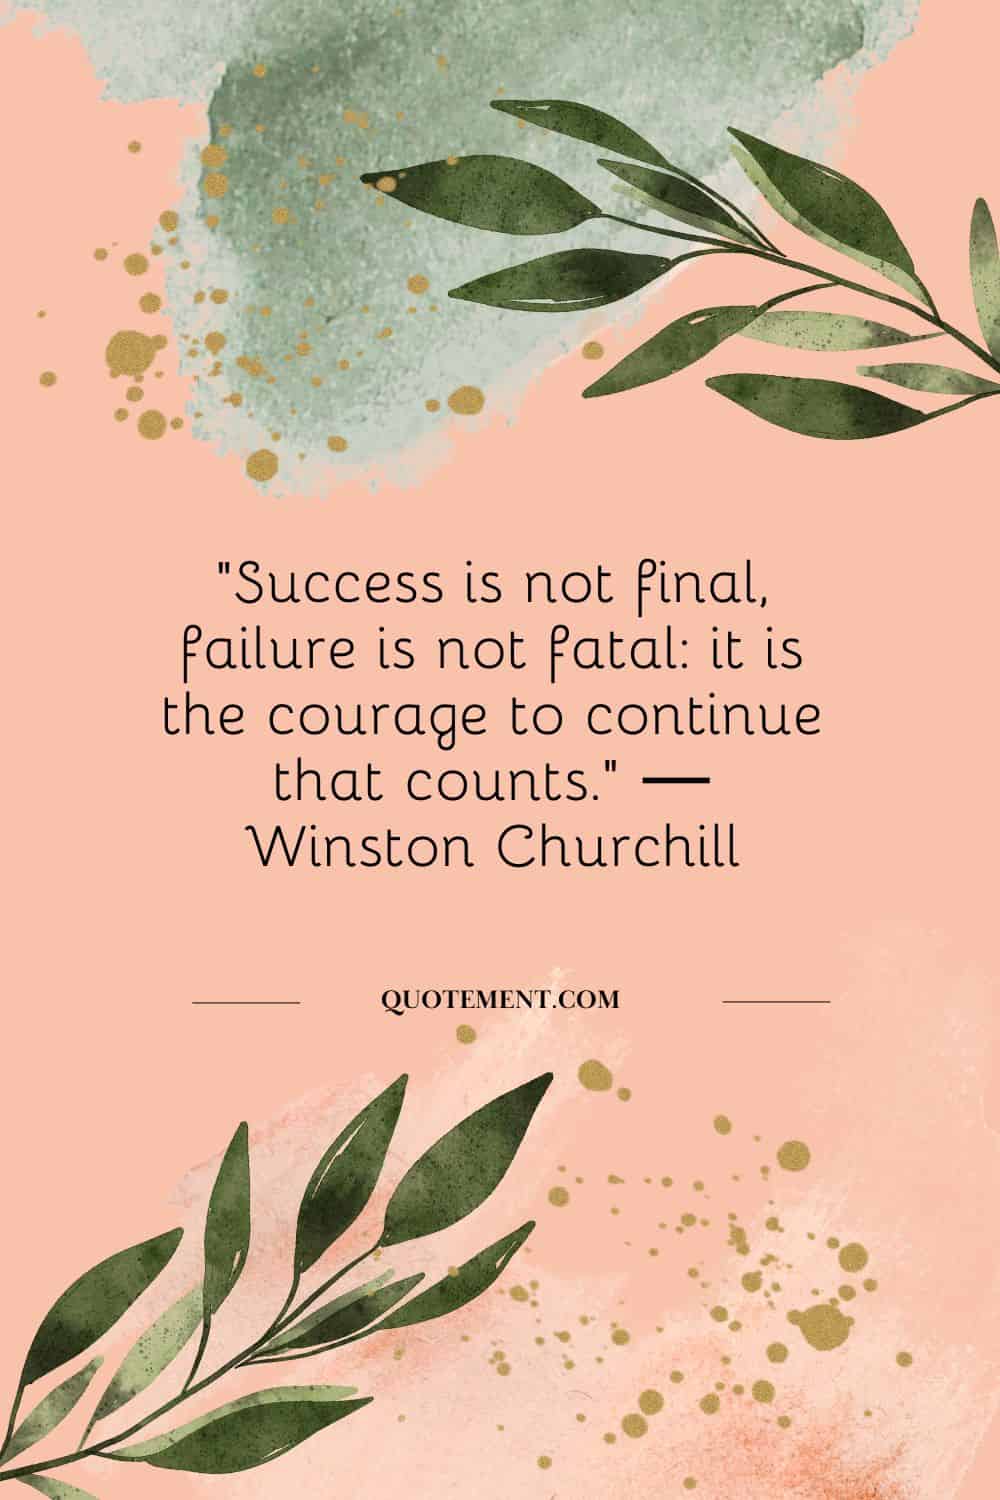 “Success is not final, failure is not fatal it is the courage to continue that counts.”